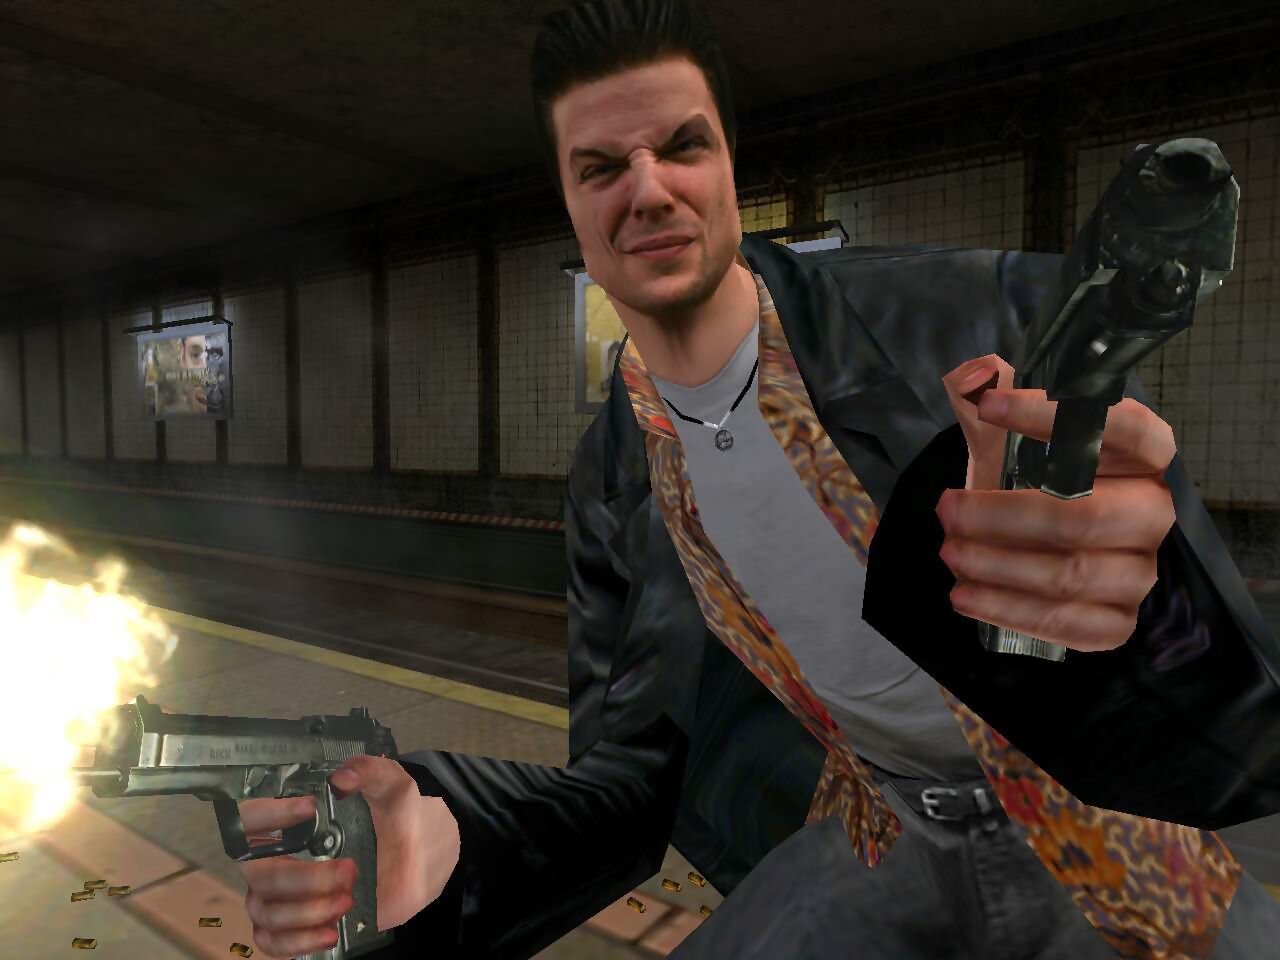 Here is what a modern-day remake of the first Max Payne game could have  looked like